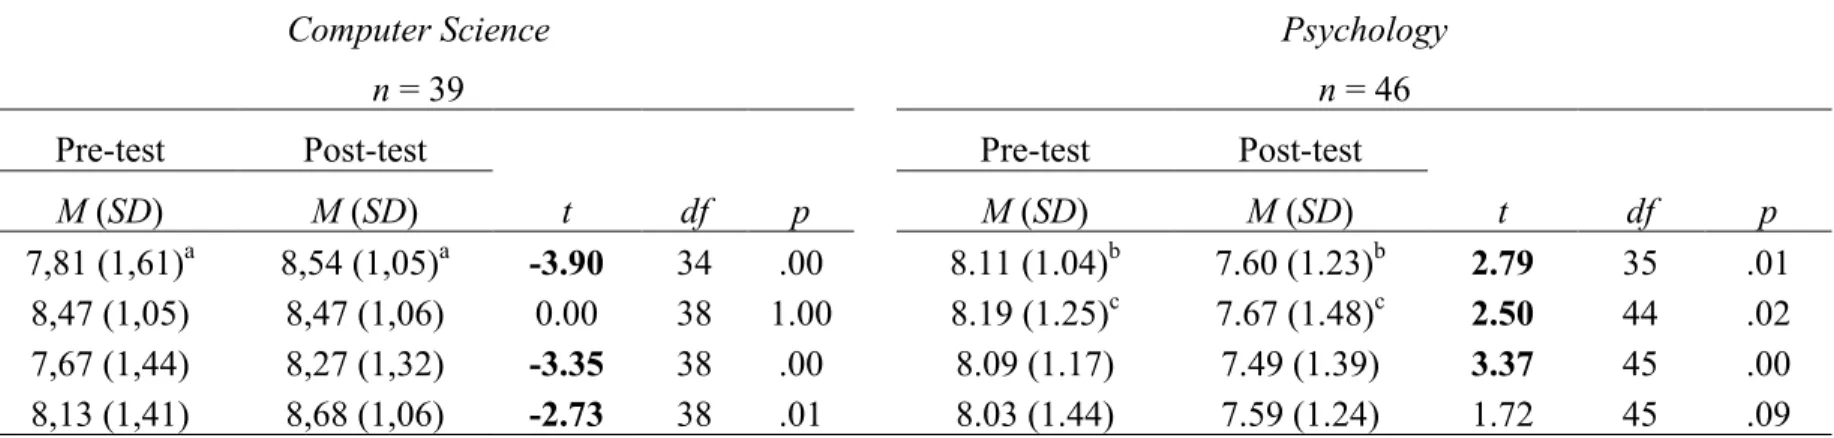 Table 9 . Perceived team collaboration in Pre-test and Post-test, by major  Perceived team collaboration in Pre-test and Post-test, by major 